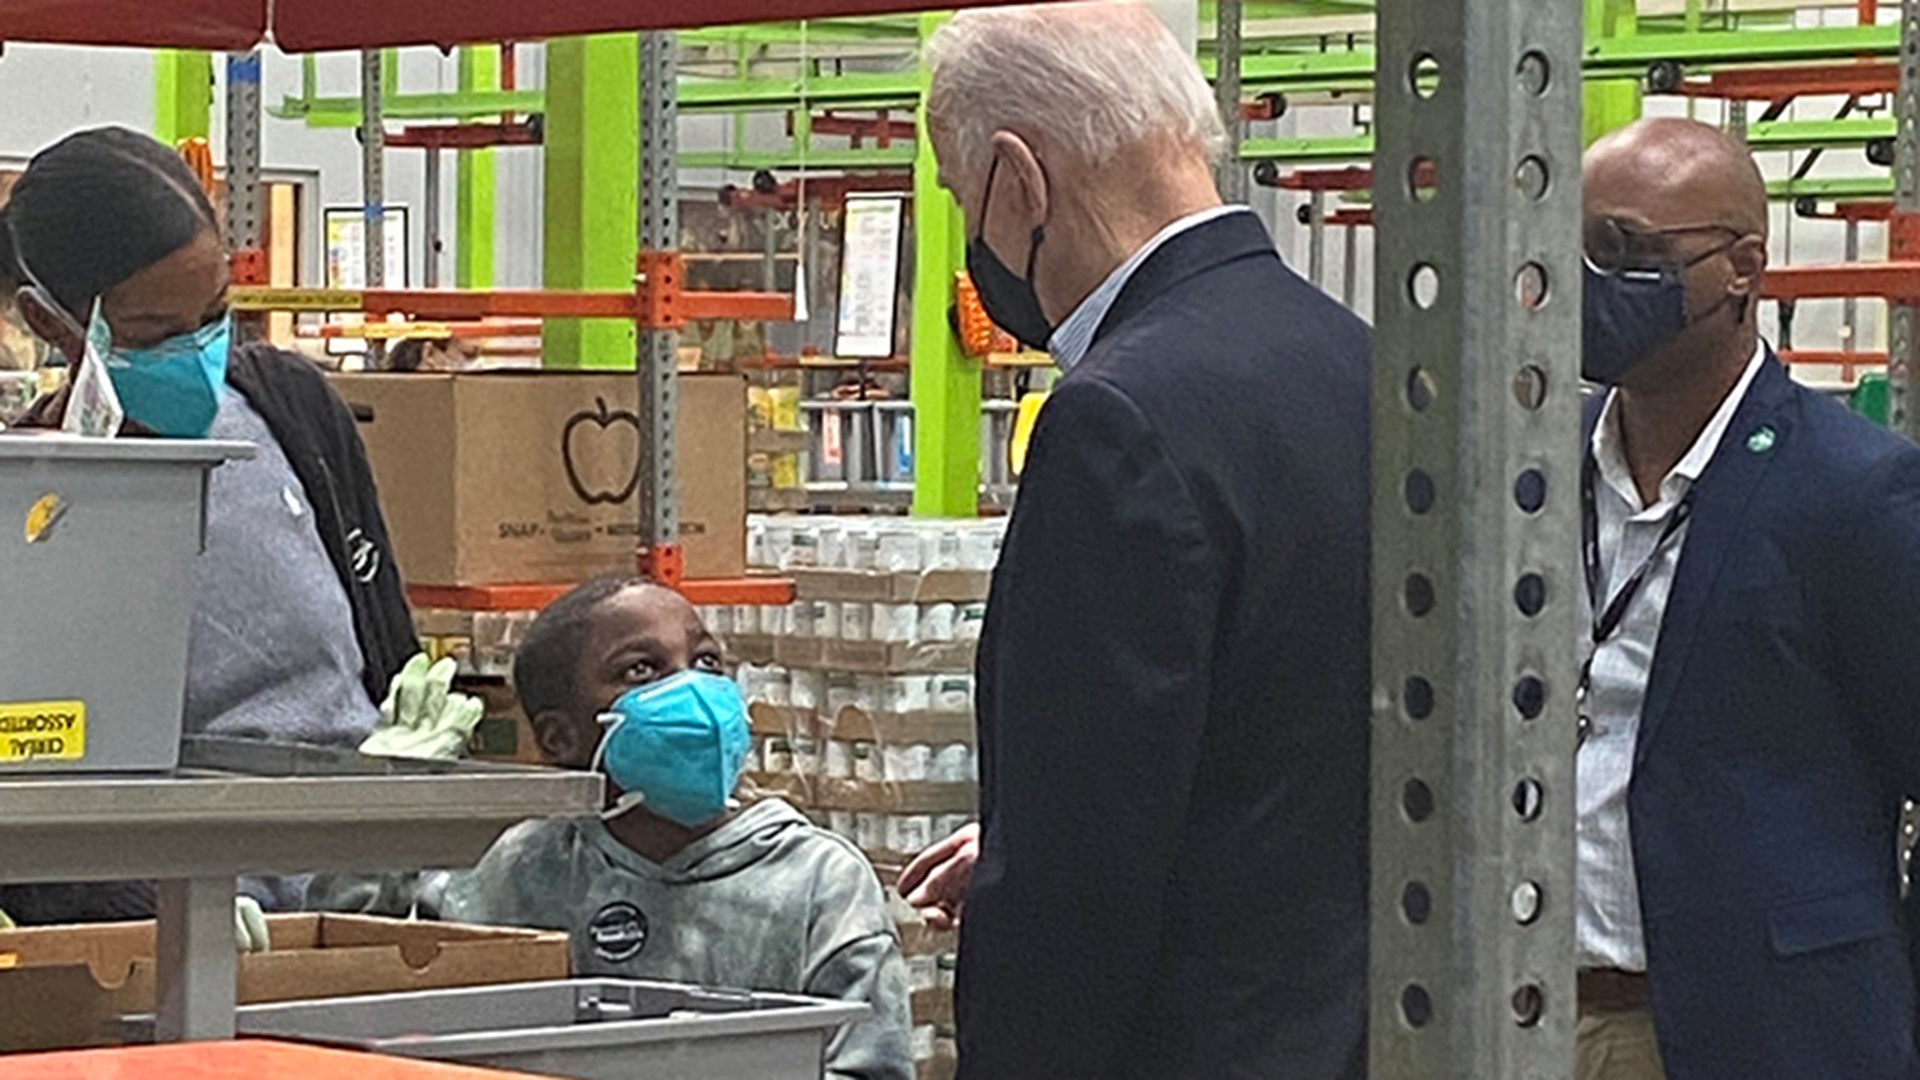 The biggest food bank in the country made quite an impression on the first couple who were eager to learn what more the federal government can do to fight hunger.